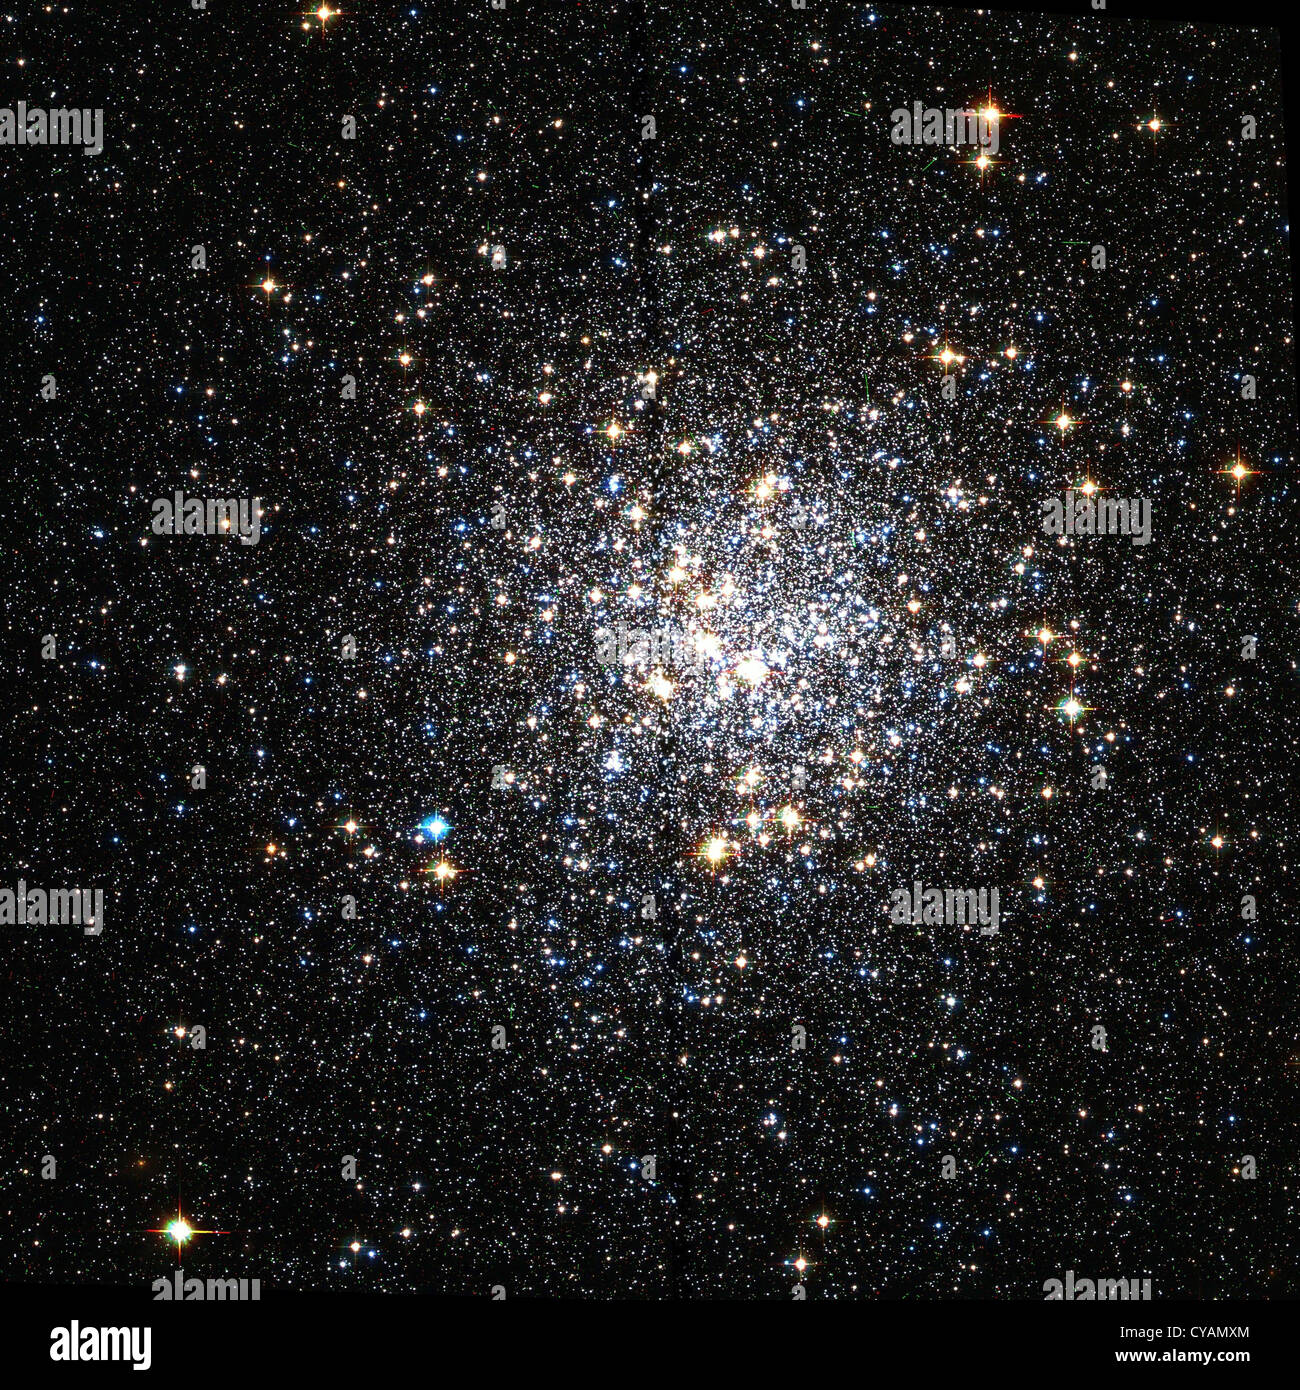 Messier object 9 - globular cluster in Ophiucus constellation Stock Photo